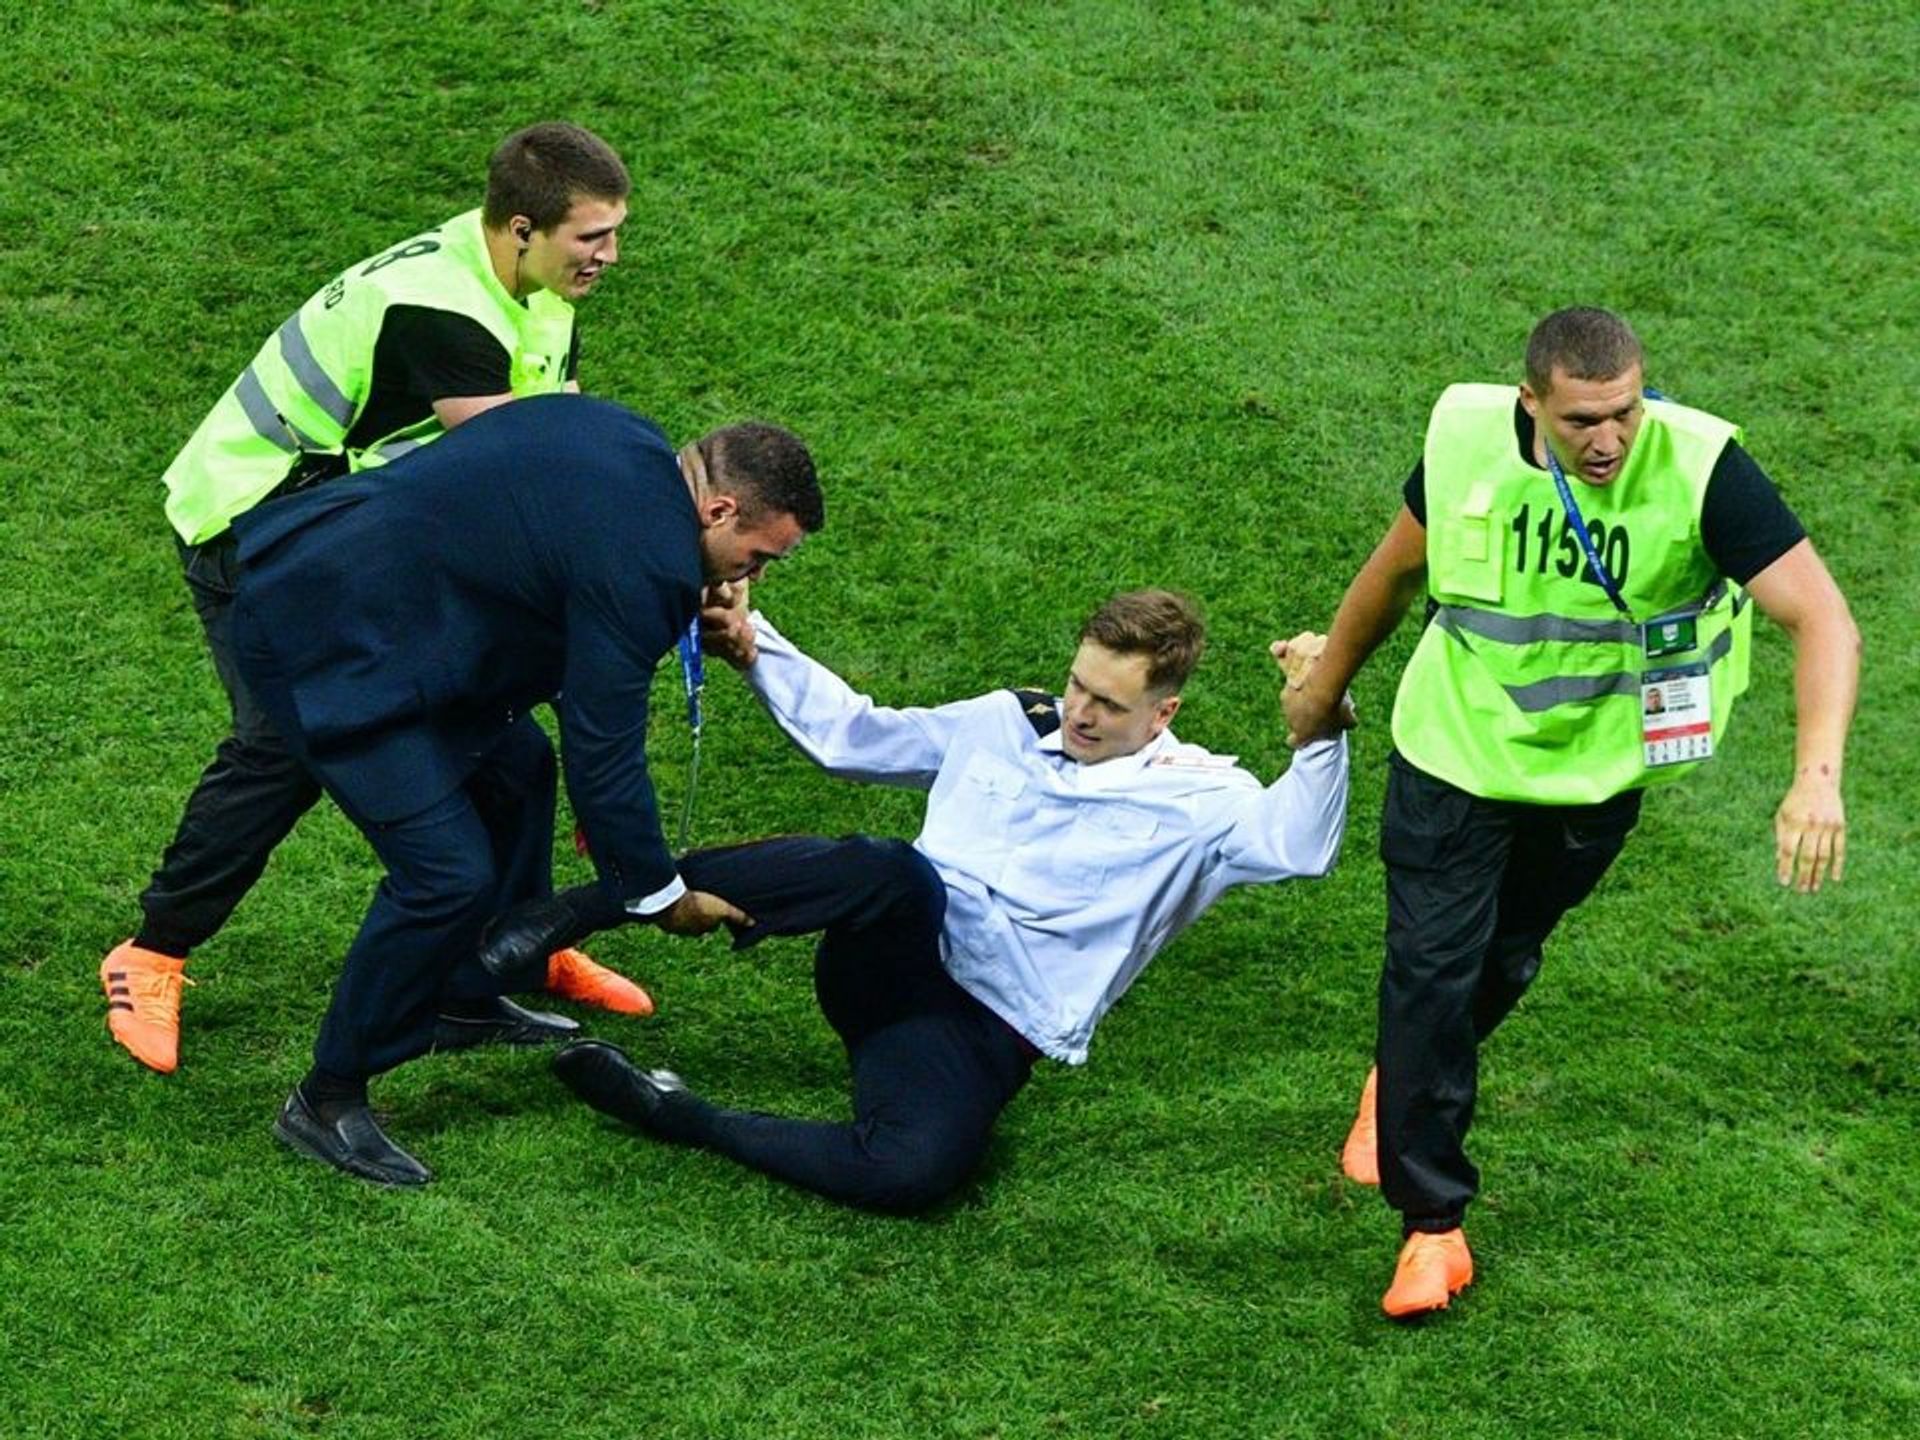 Pyotr Verzilov served a 15-day prison sentence after running with other Pussy Riot members onto the field at Moscow’s FIFA World Cup final 